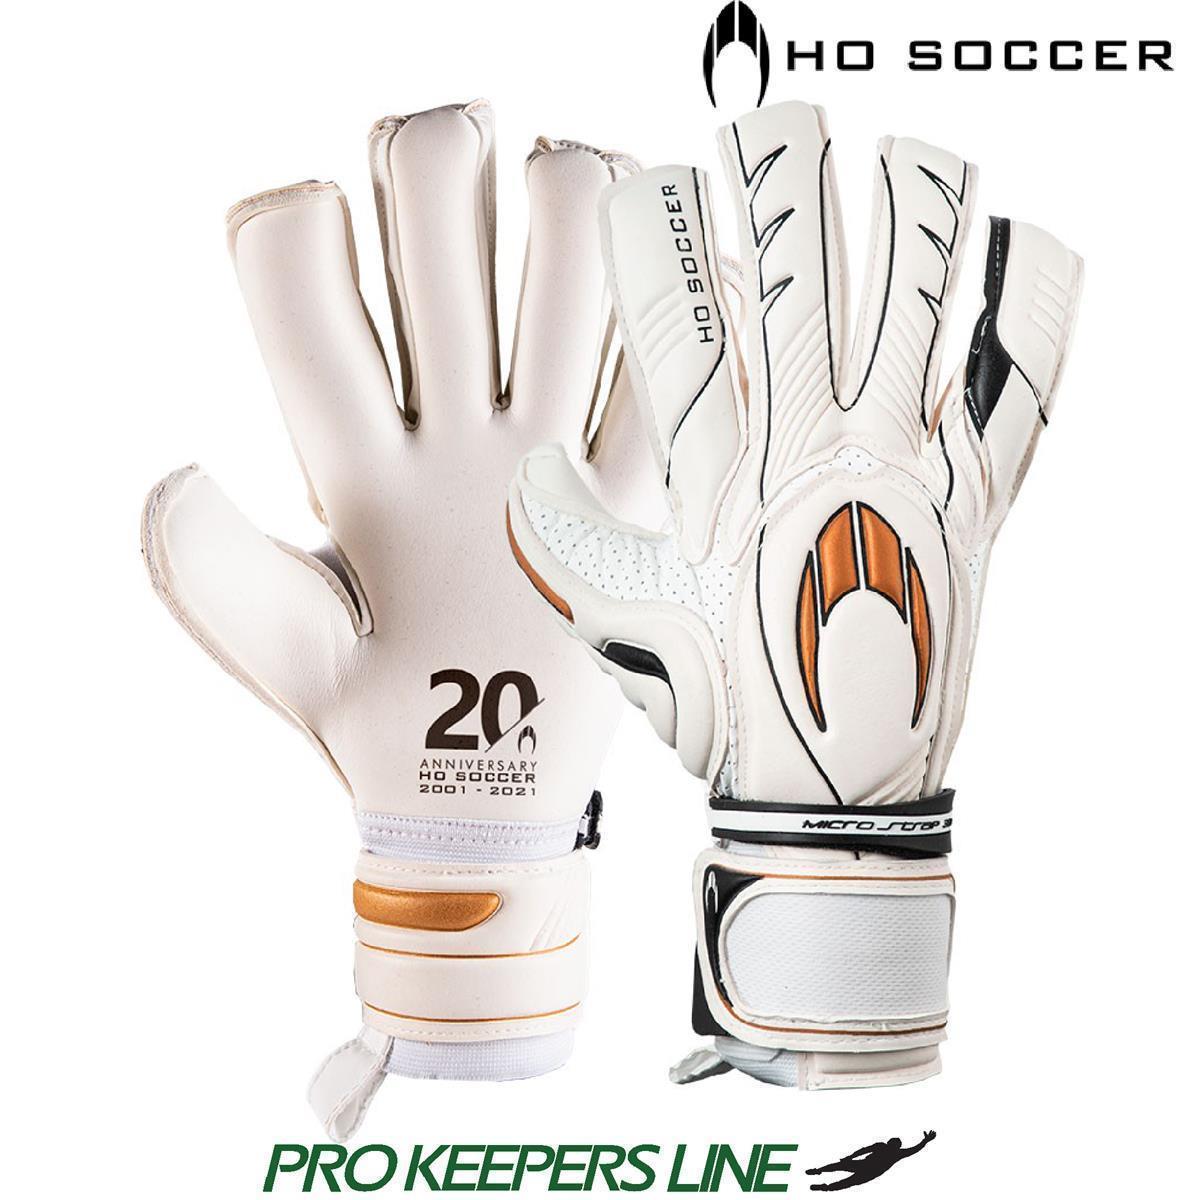 HO SOCCER GHOTTA SPECIAL EDITION RETRO WHITE/GOLD